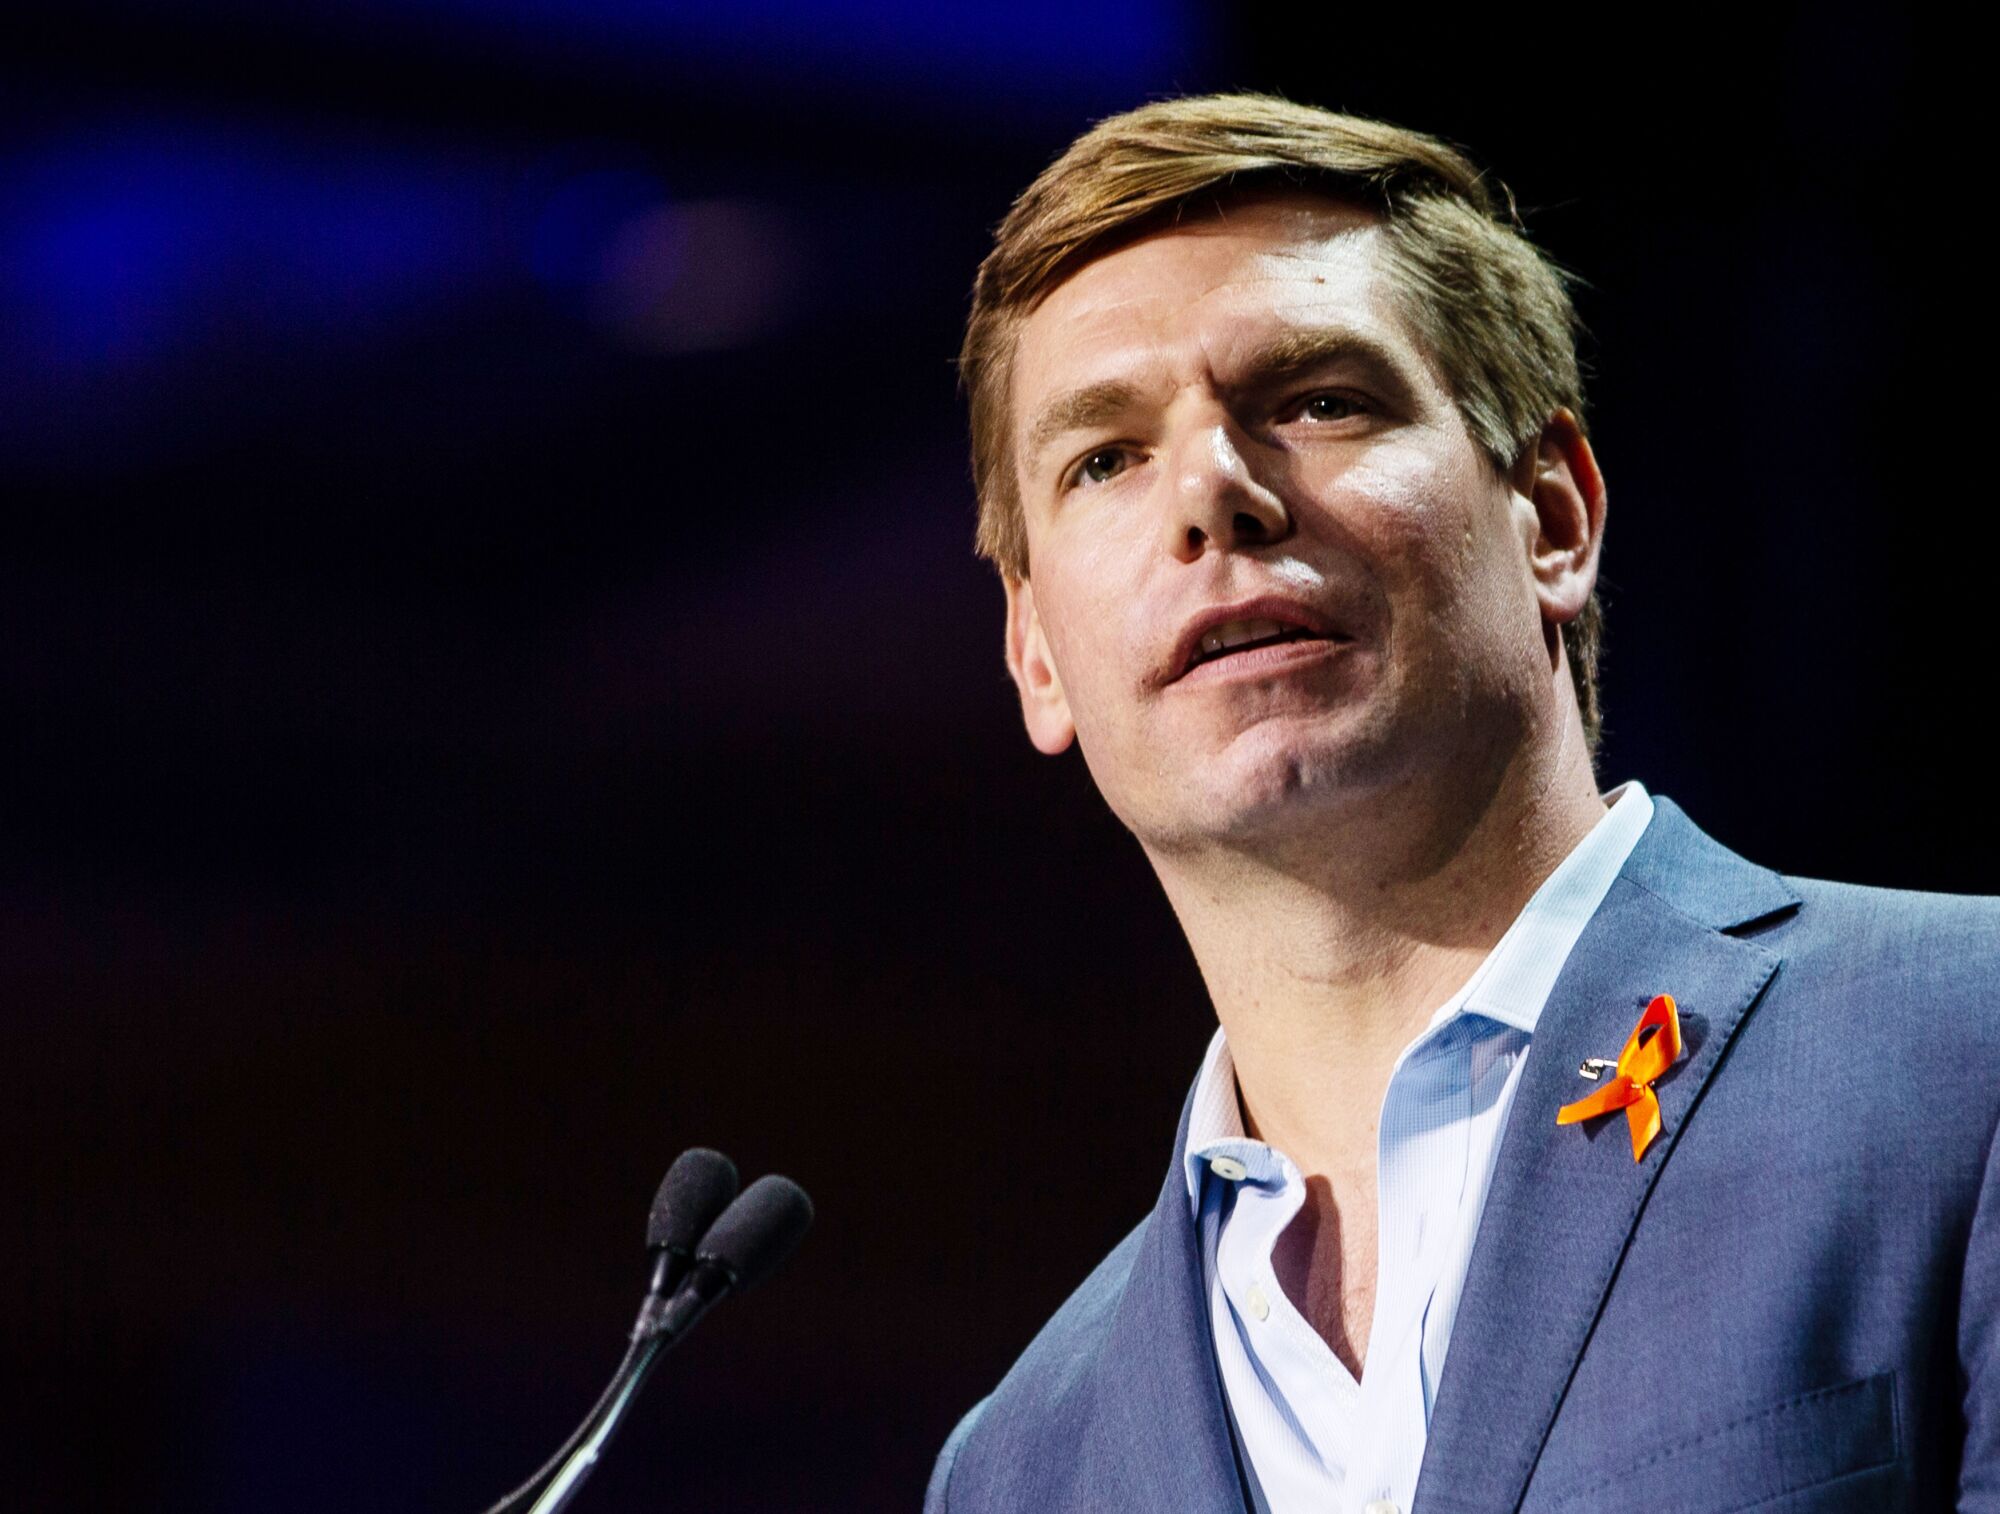 Rep Eric Swalwell speaks at a convention.